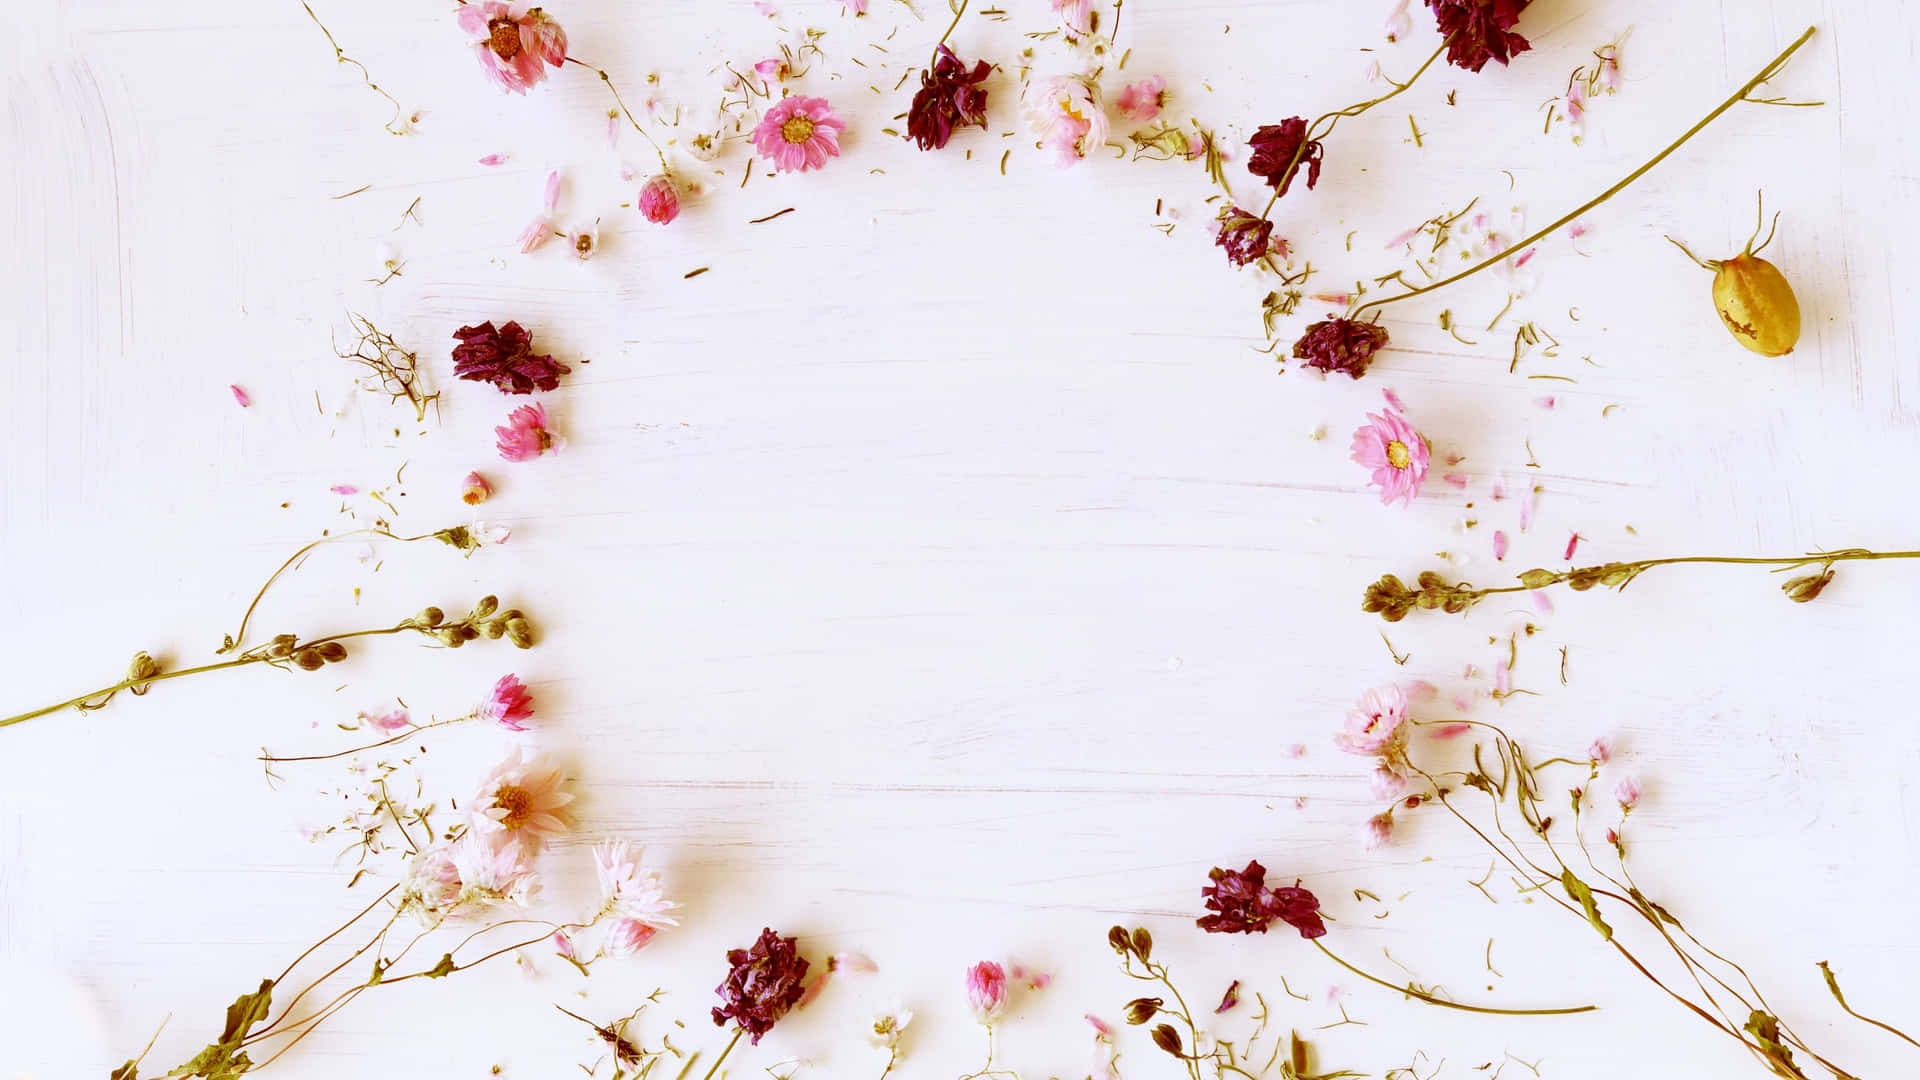 A Circle Of Dried Flowers On A White Background Wallpaper